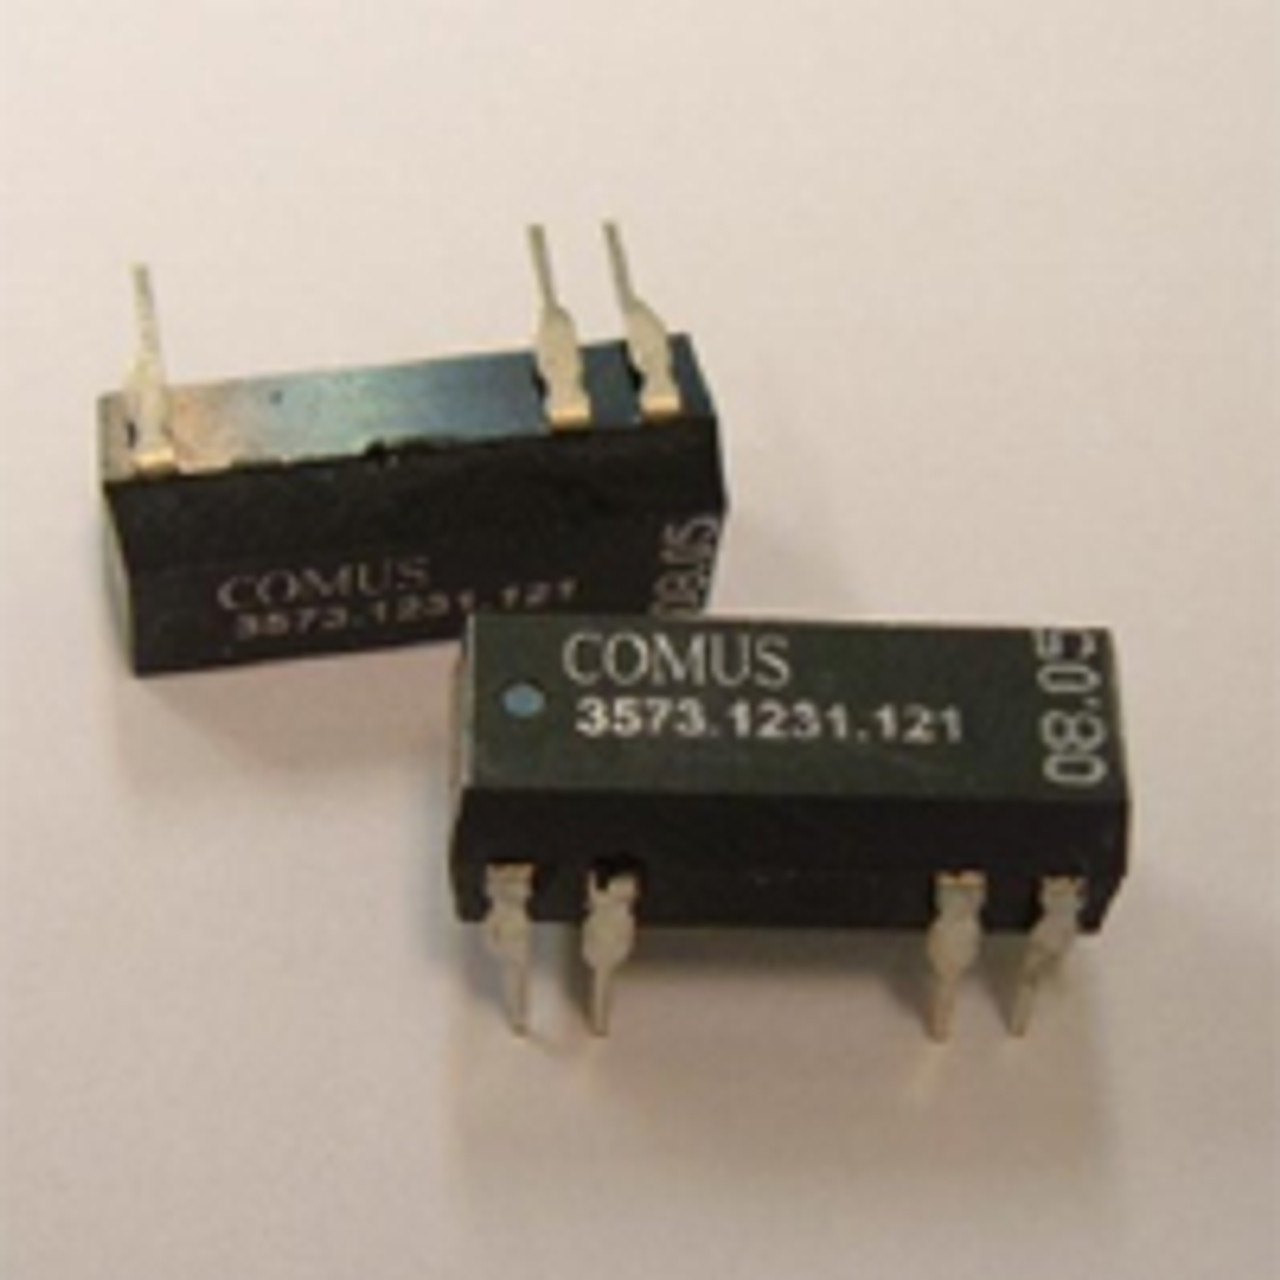 Comus 3565-1231-124 Reed Relays